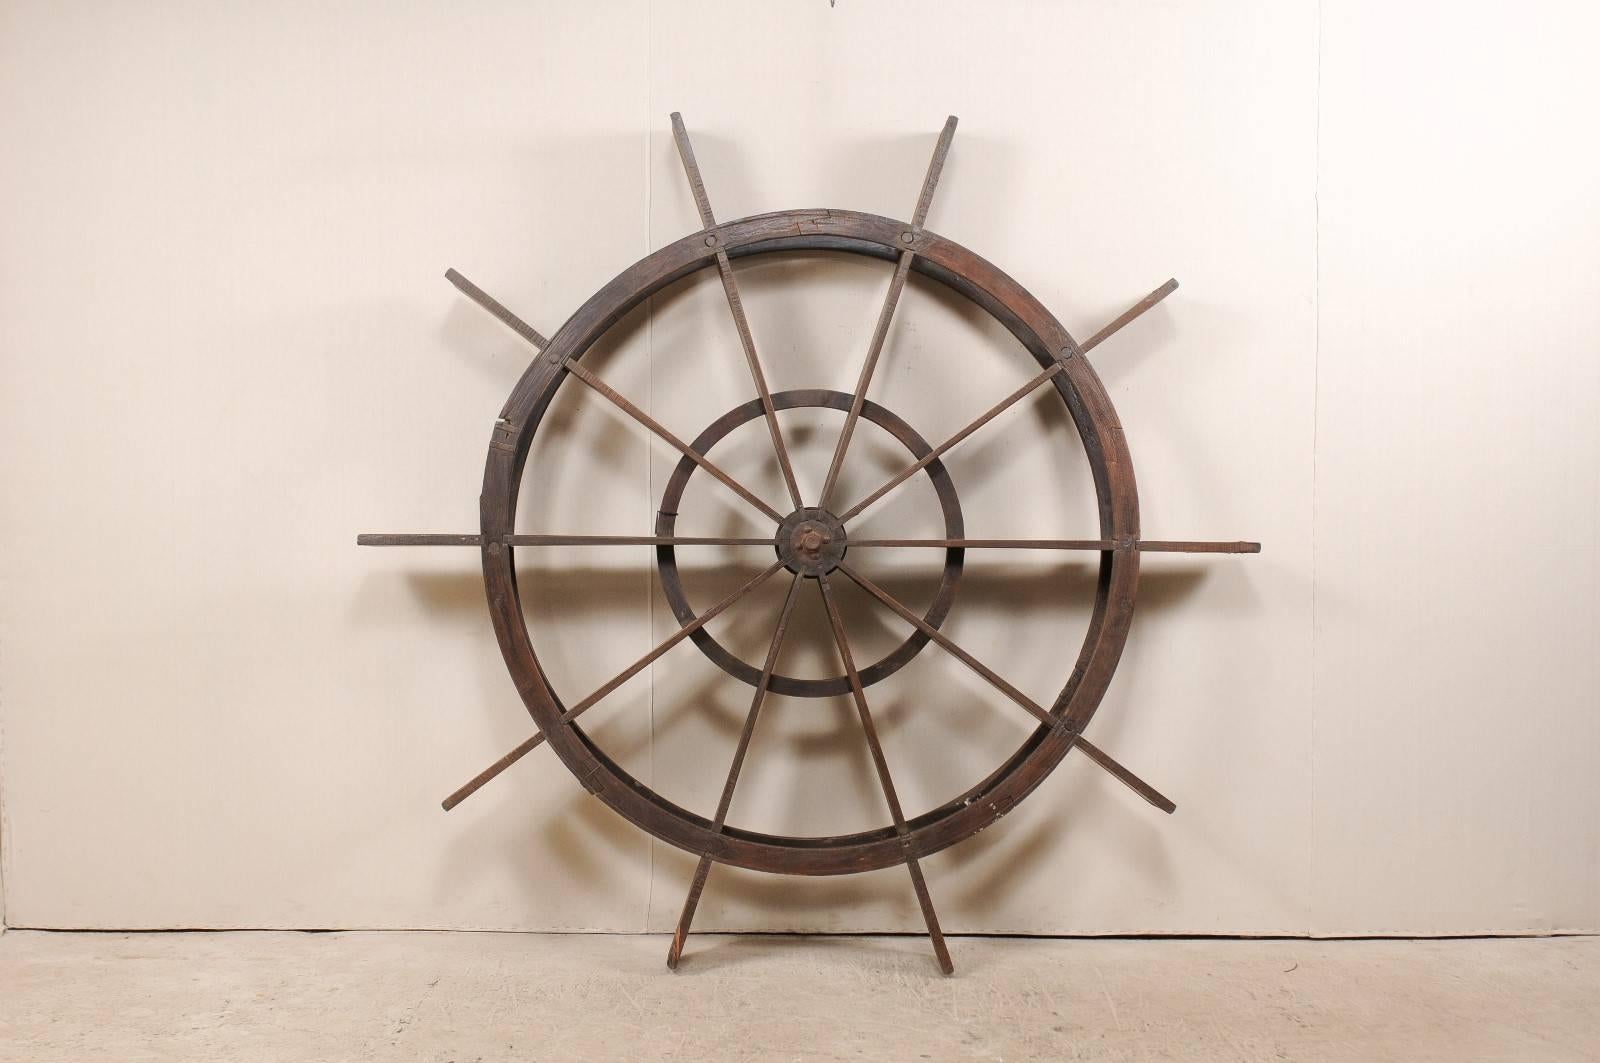 Rustic Grand Sized Wood Antique Agricultural Water Wheel Accessory from Kerala, India